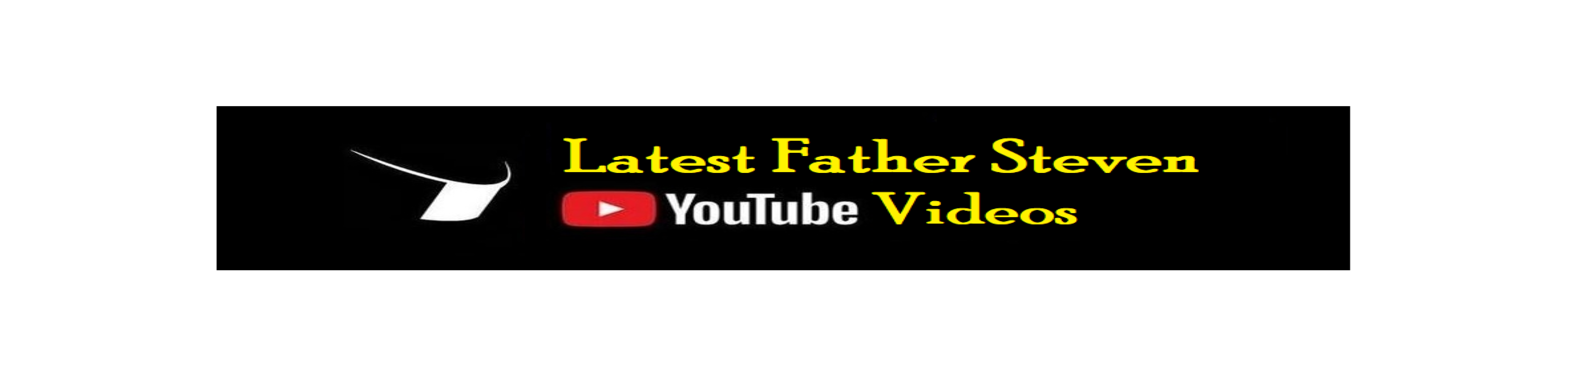 latest father steven youtube videos banner